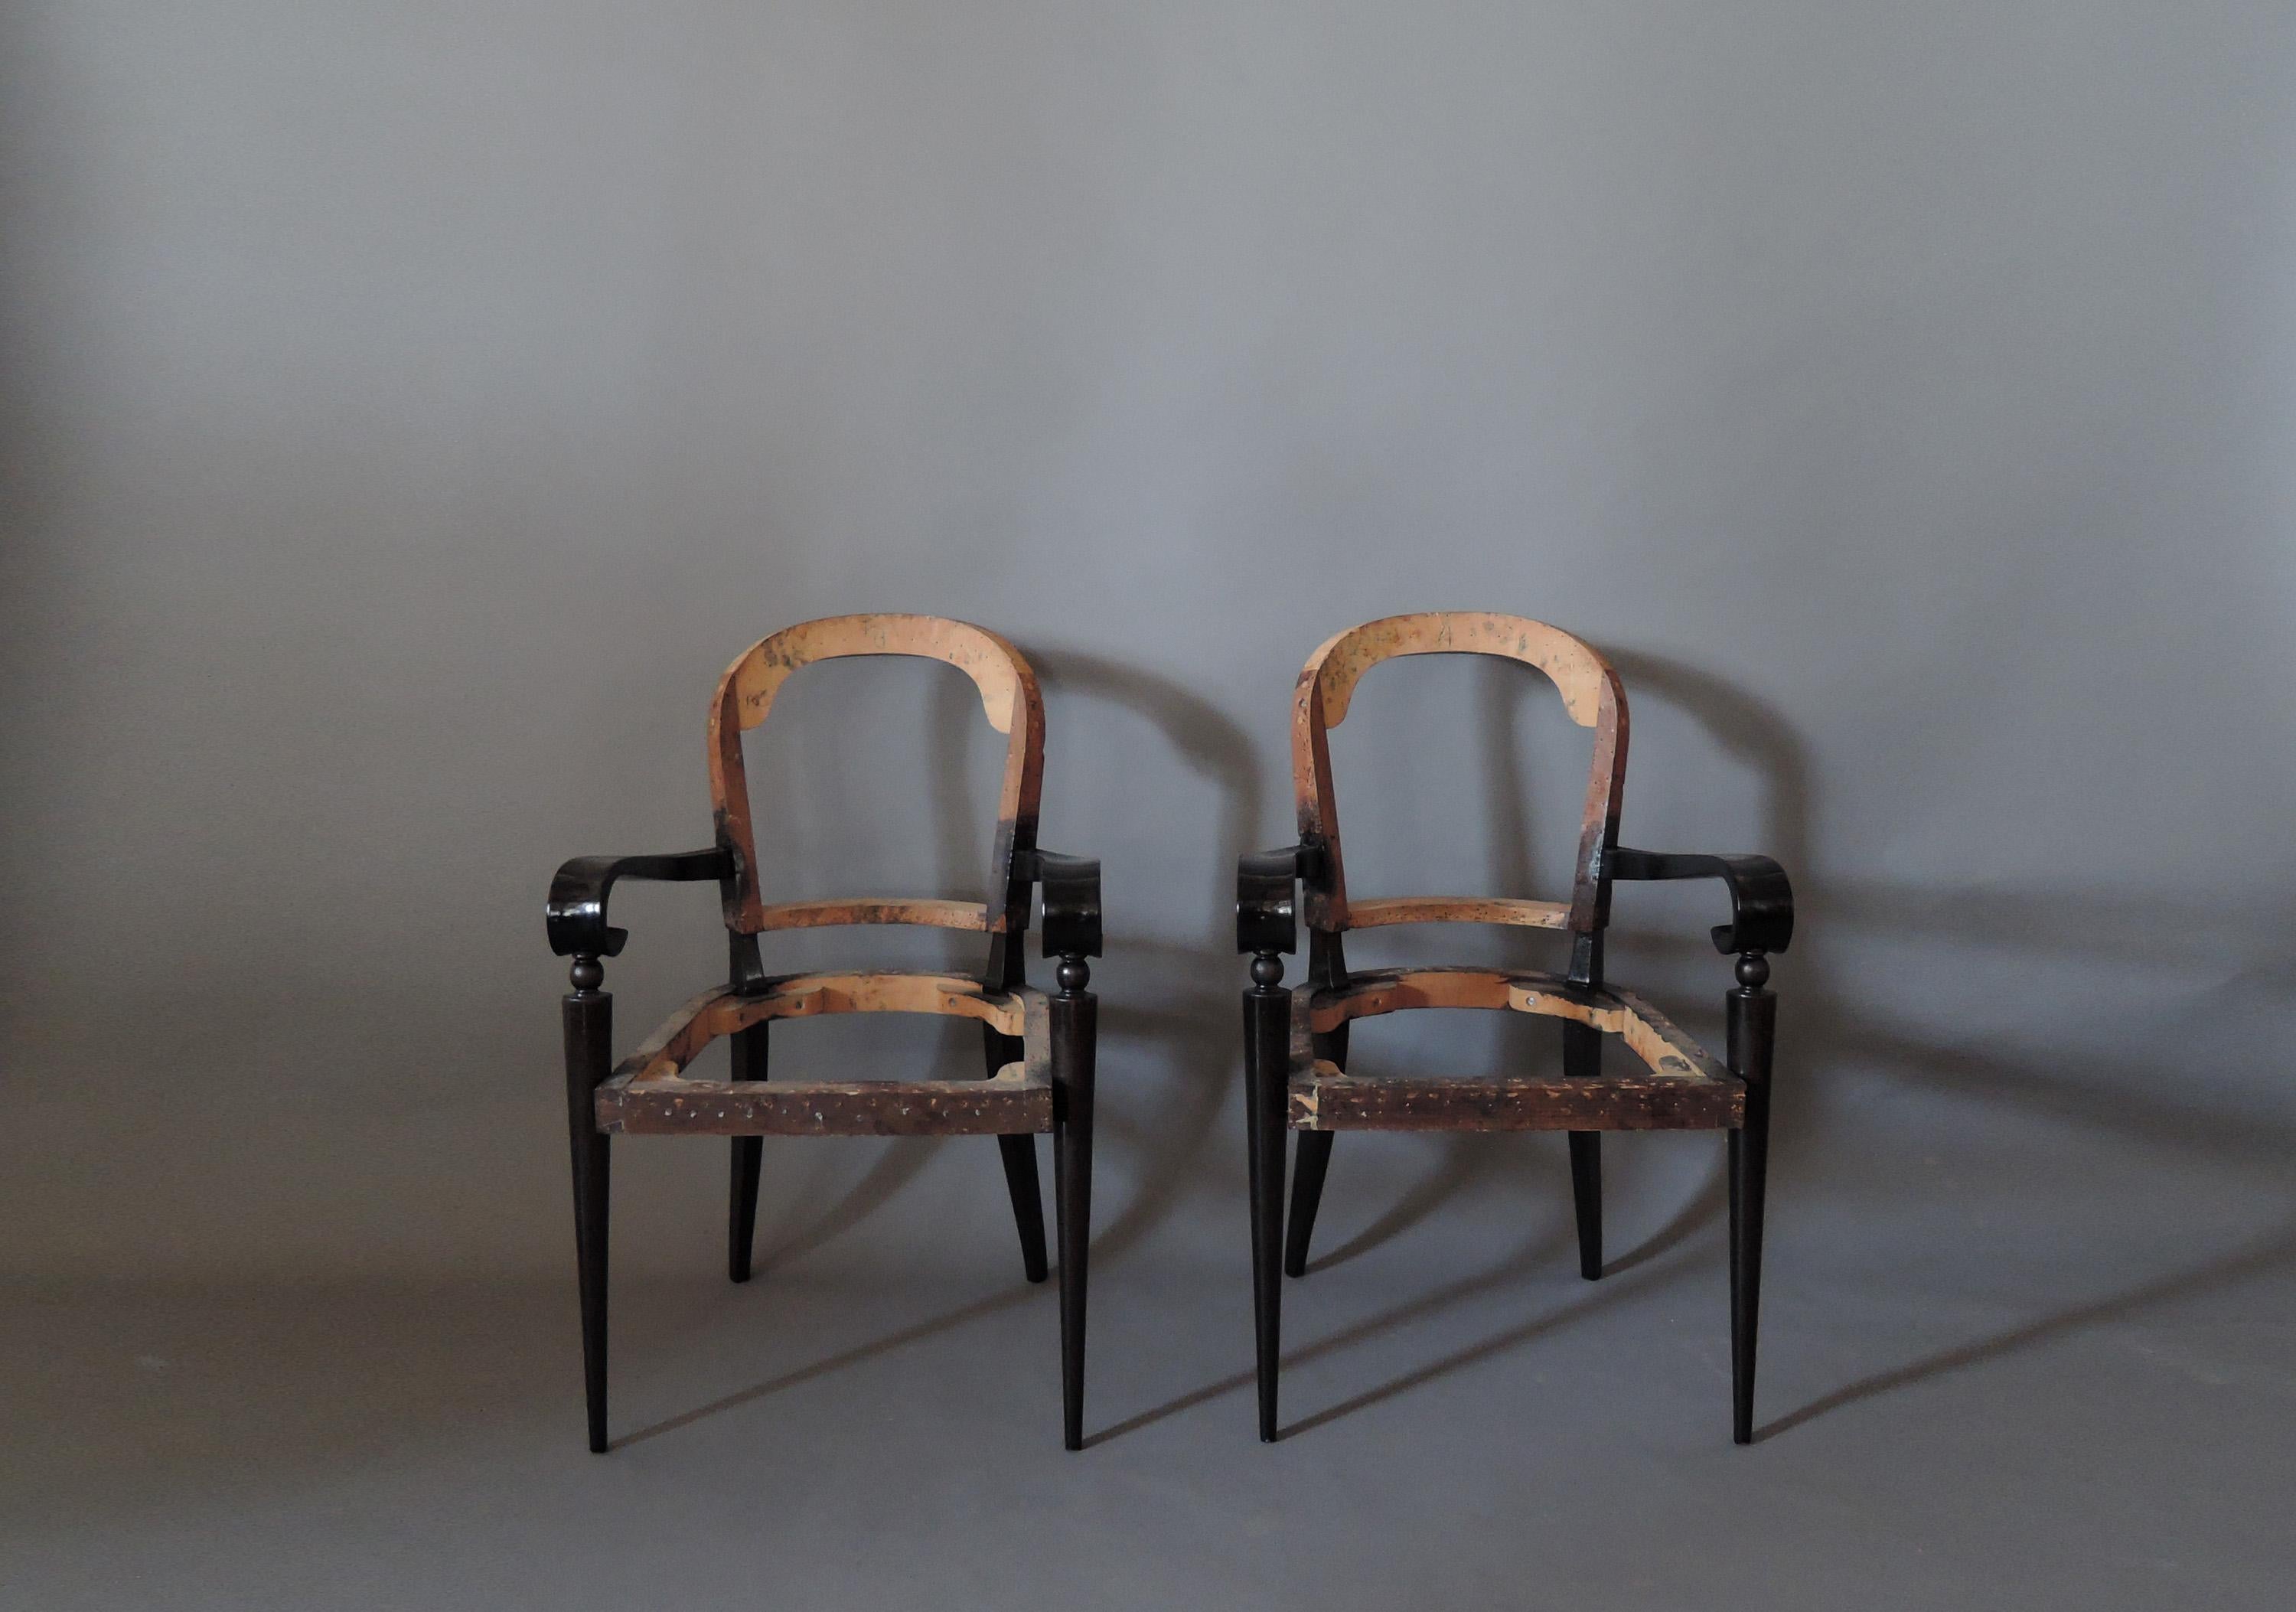 A Pair of Fine French Art Deco Ebonized Mahogany Arm Chairs by Maxime Old For Sale 4